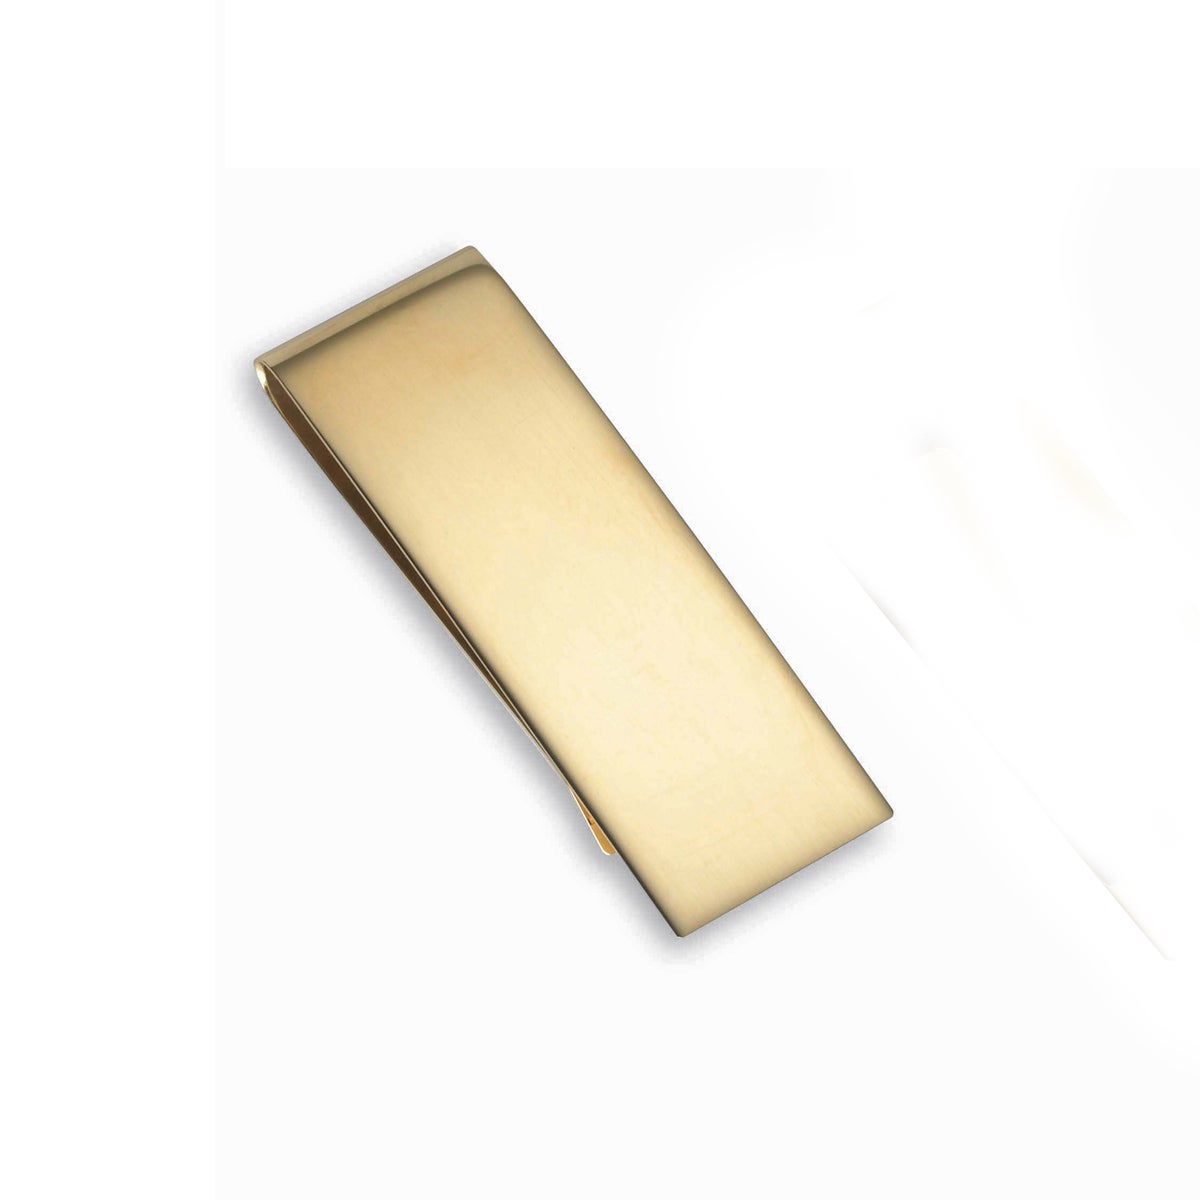 A 14k yellow gold polished money clip displayed on a neutral white background.